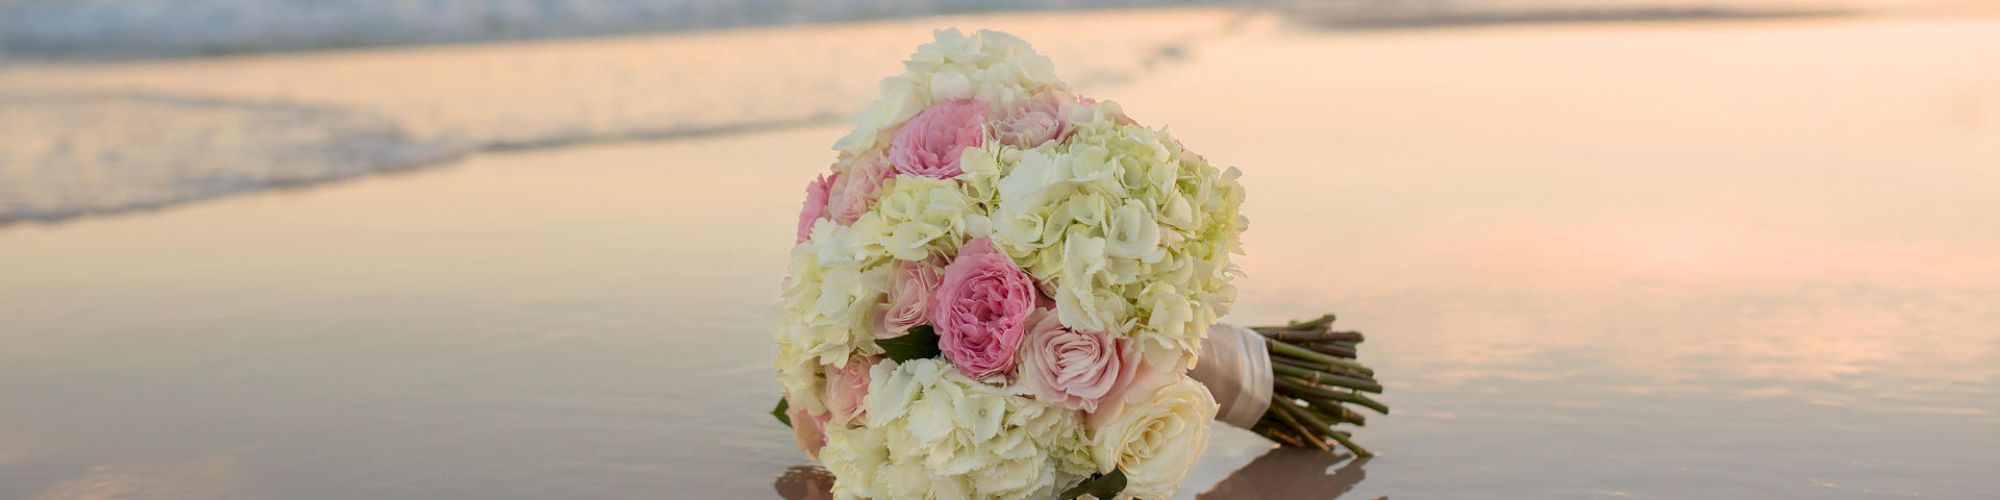 A bridal bouquet on the beach with waves in the background during sunset.